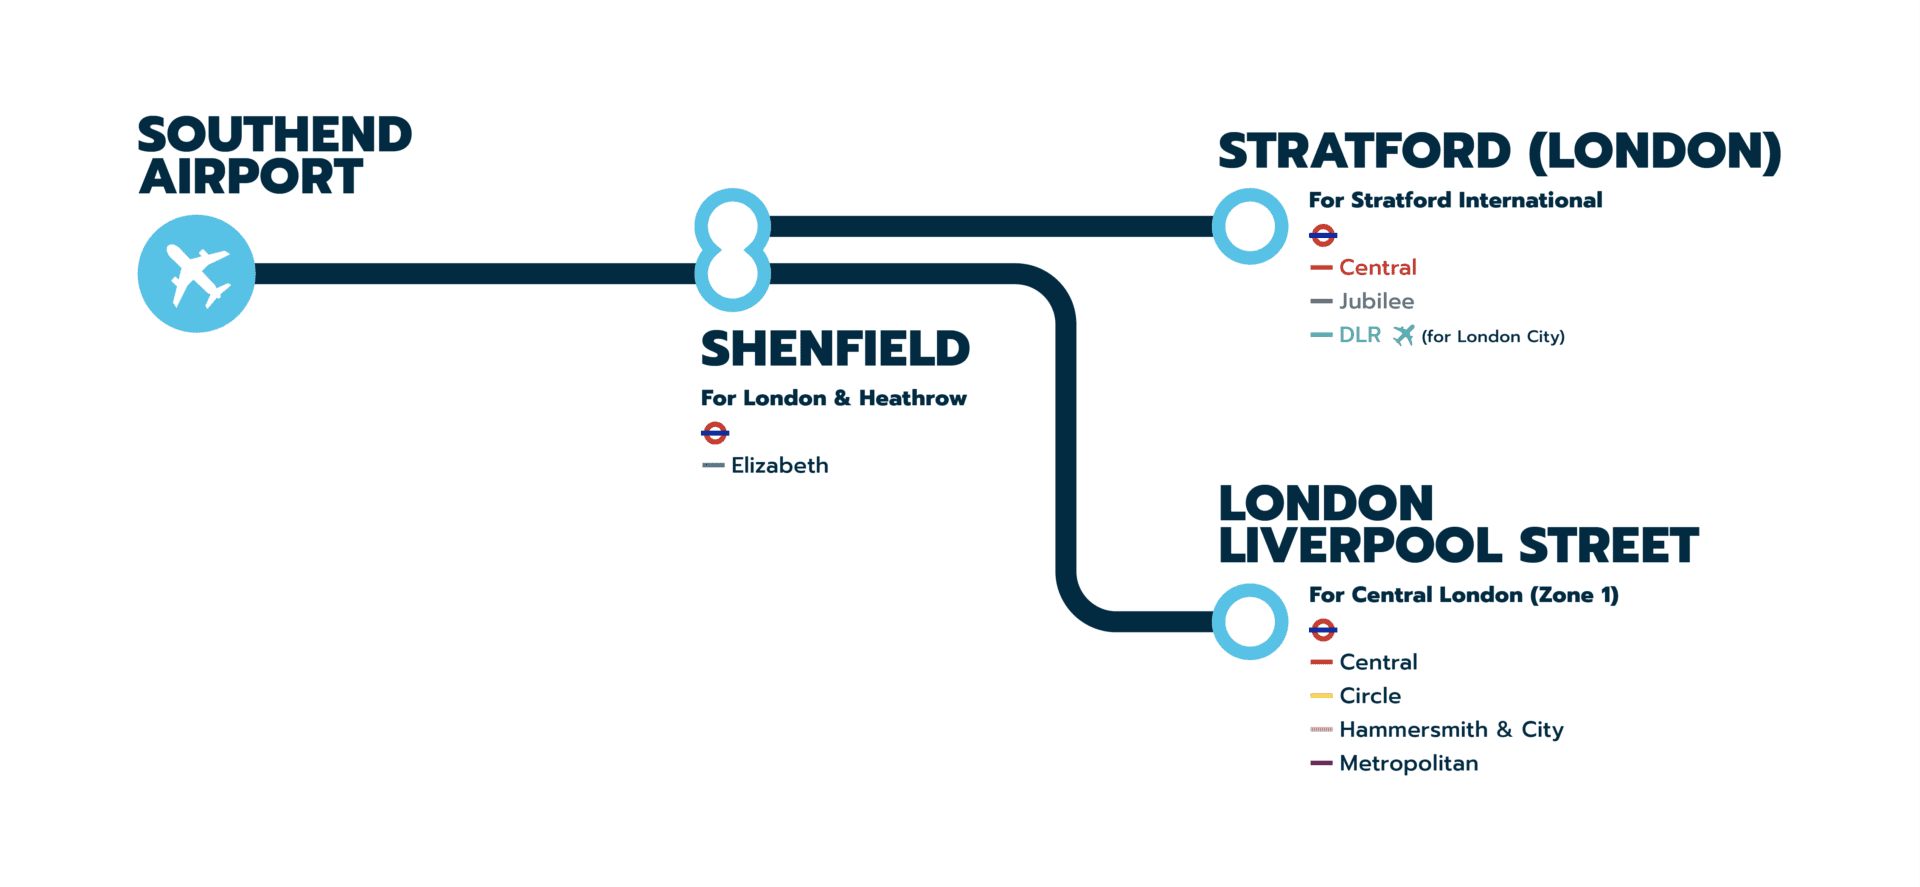 Rail connectivity from Southend Airport to Central London via Stratford or London Liverpool Street